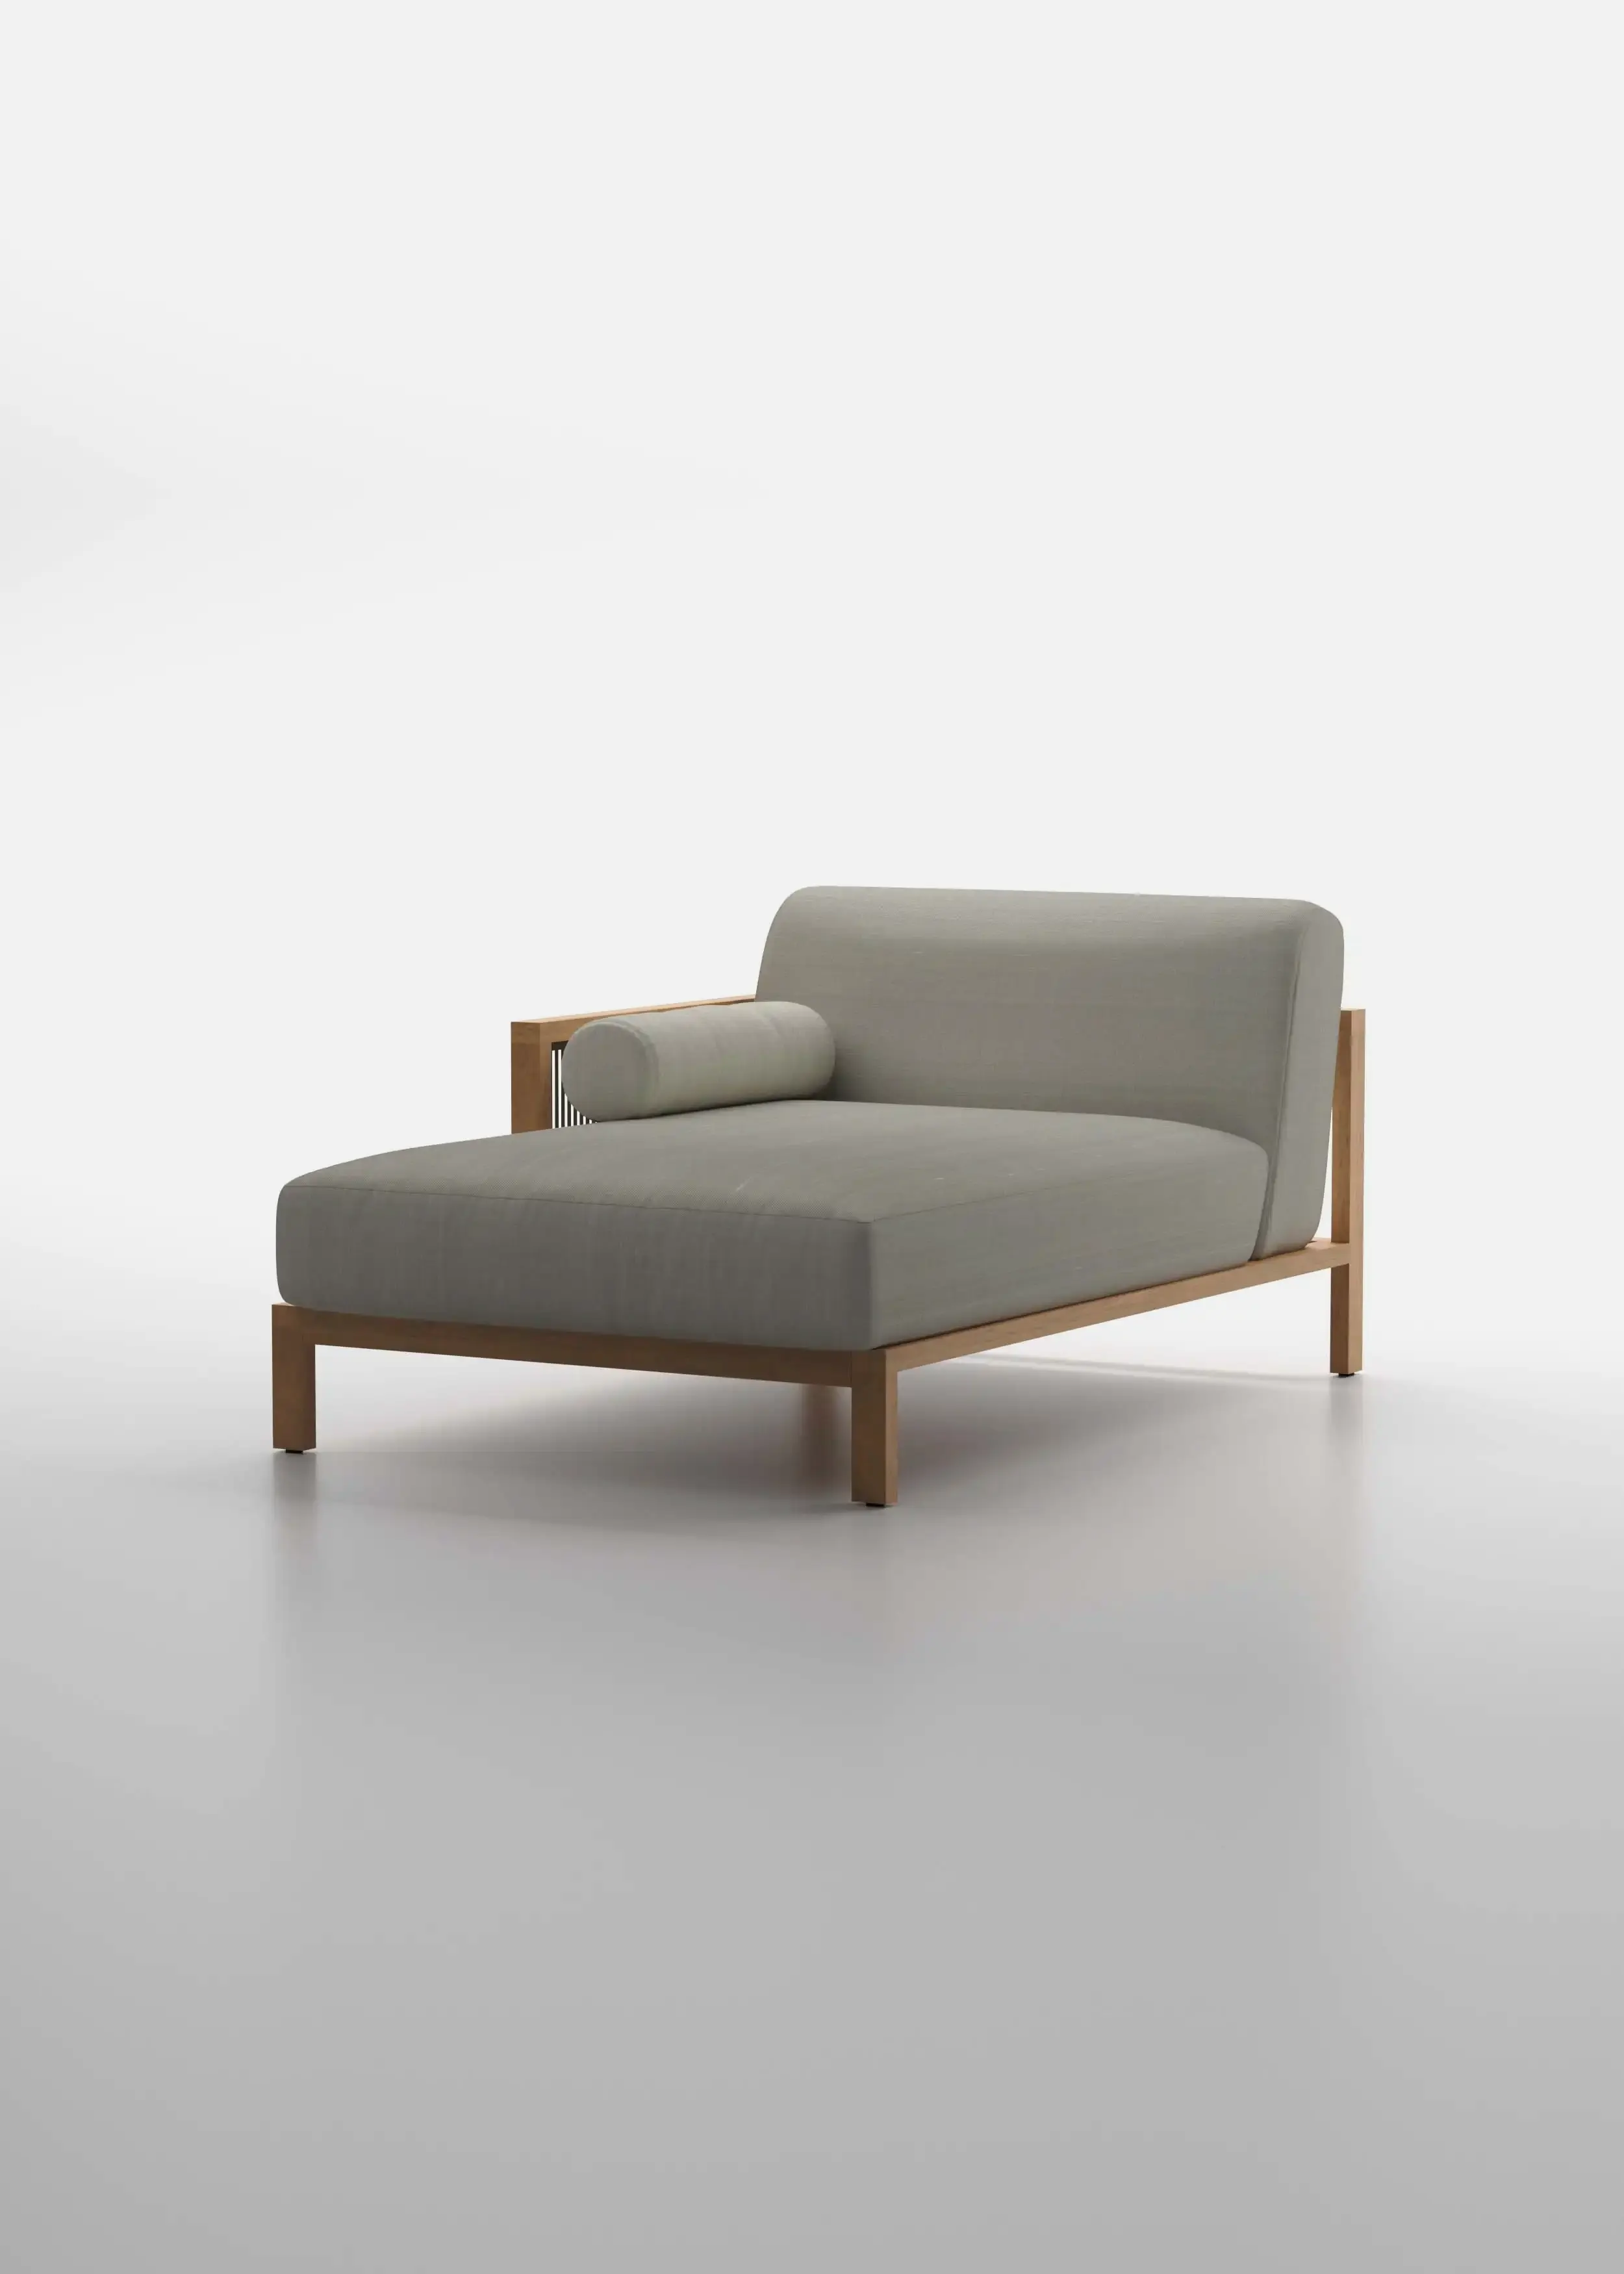 Modular Chaise Lounge Right-Arm